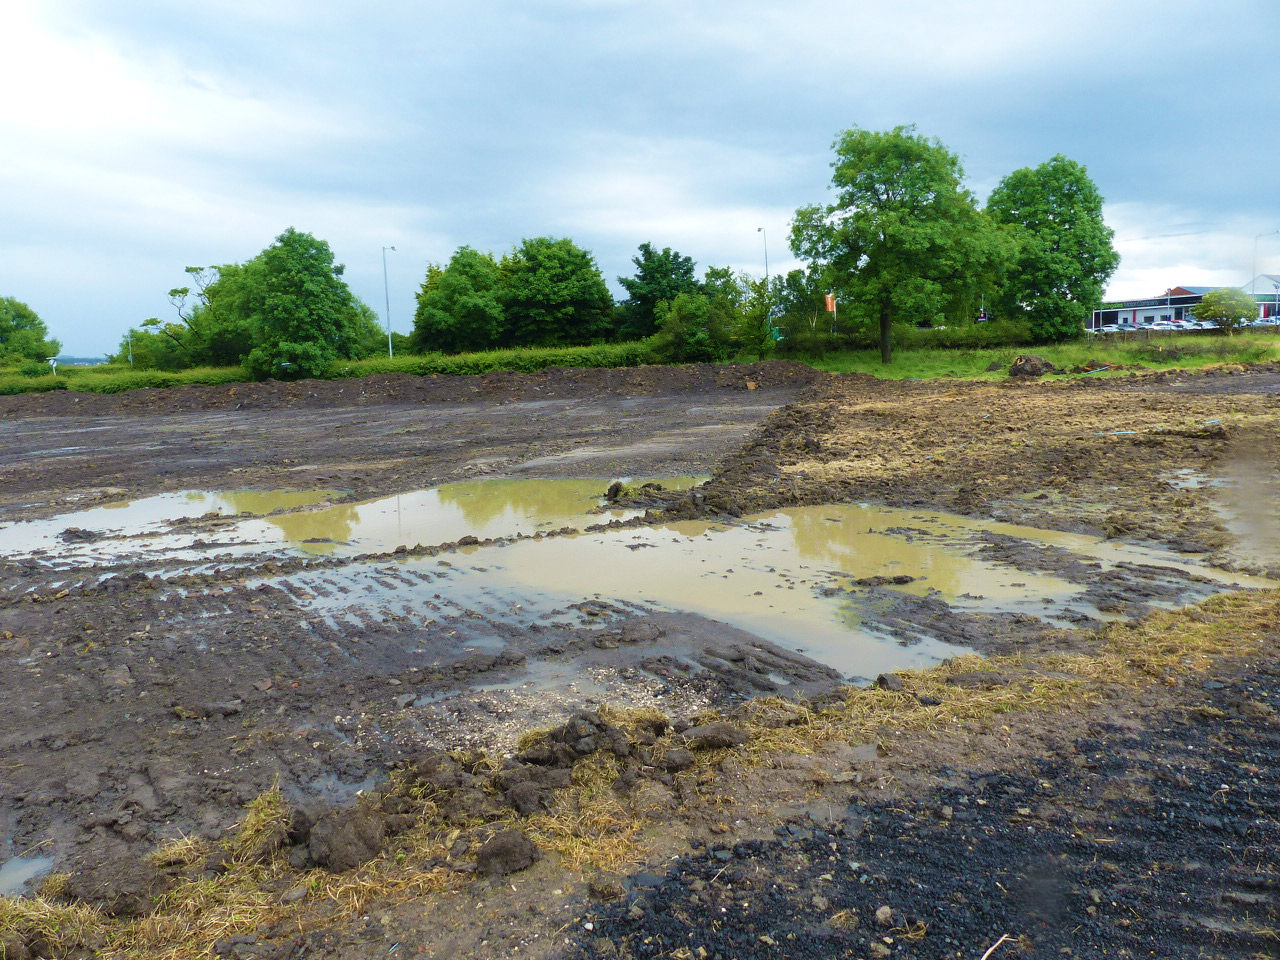  The site needed to be dewatered to facilitate the major works, with ditches needing to be filled in, dug, or re-routed. 